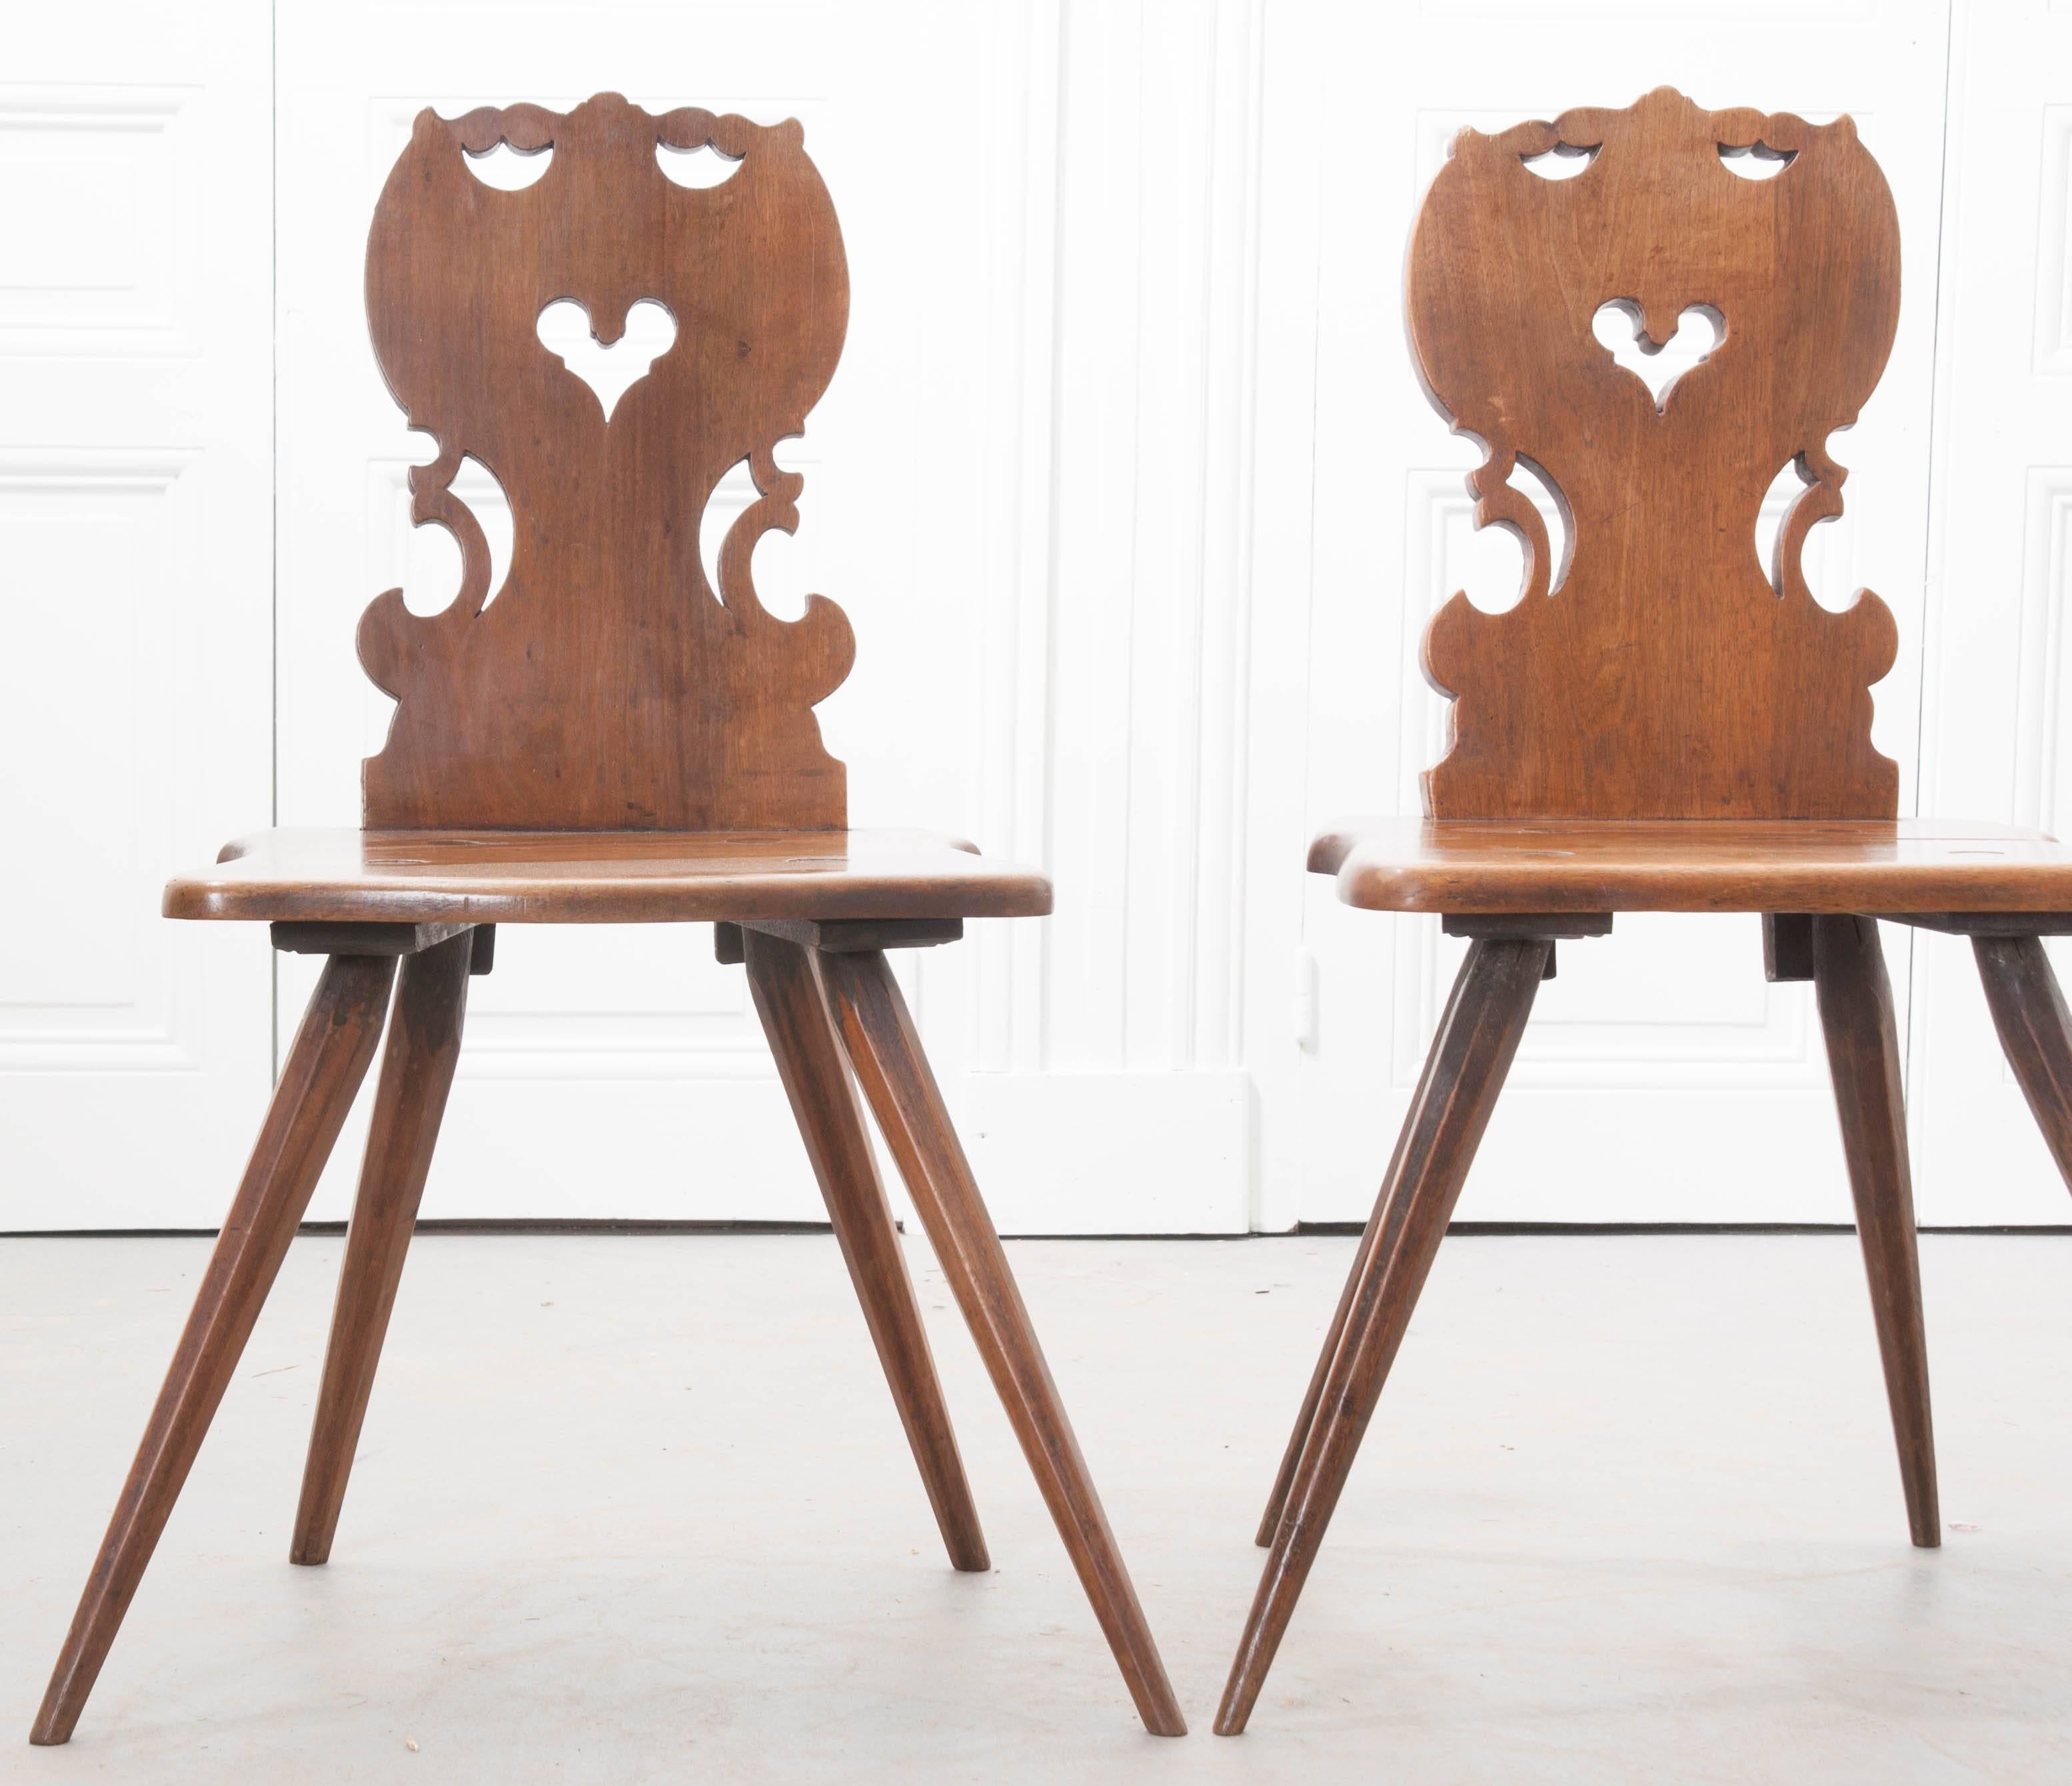 A spectacular pair of hand-carved chairs from the Alsace region of France, circa 1820. The back rests are pierced, with sweet, heart imagery, and made from carefully selected, thick plank boards of walnut. The seats are shaped, to which the faceted